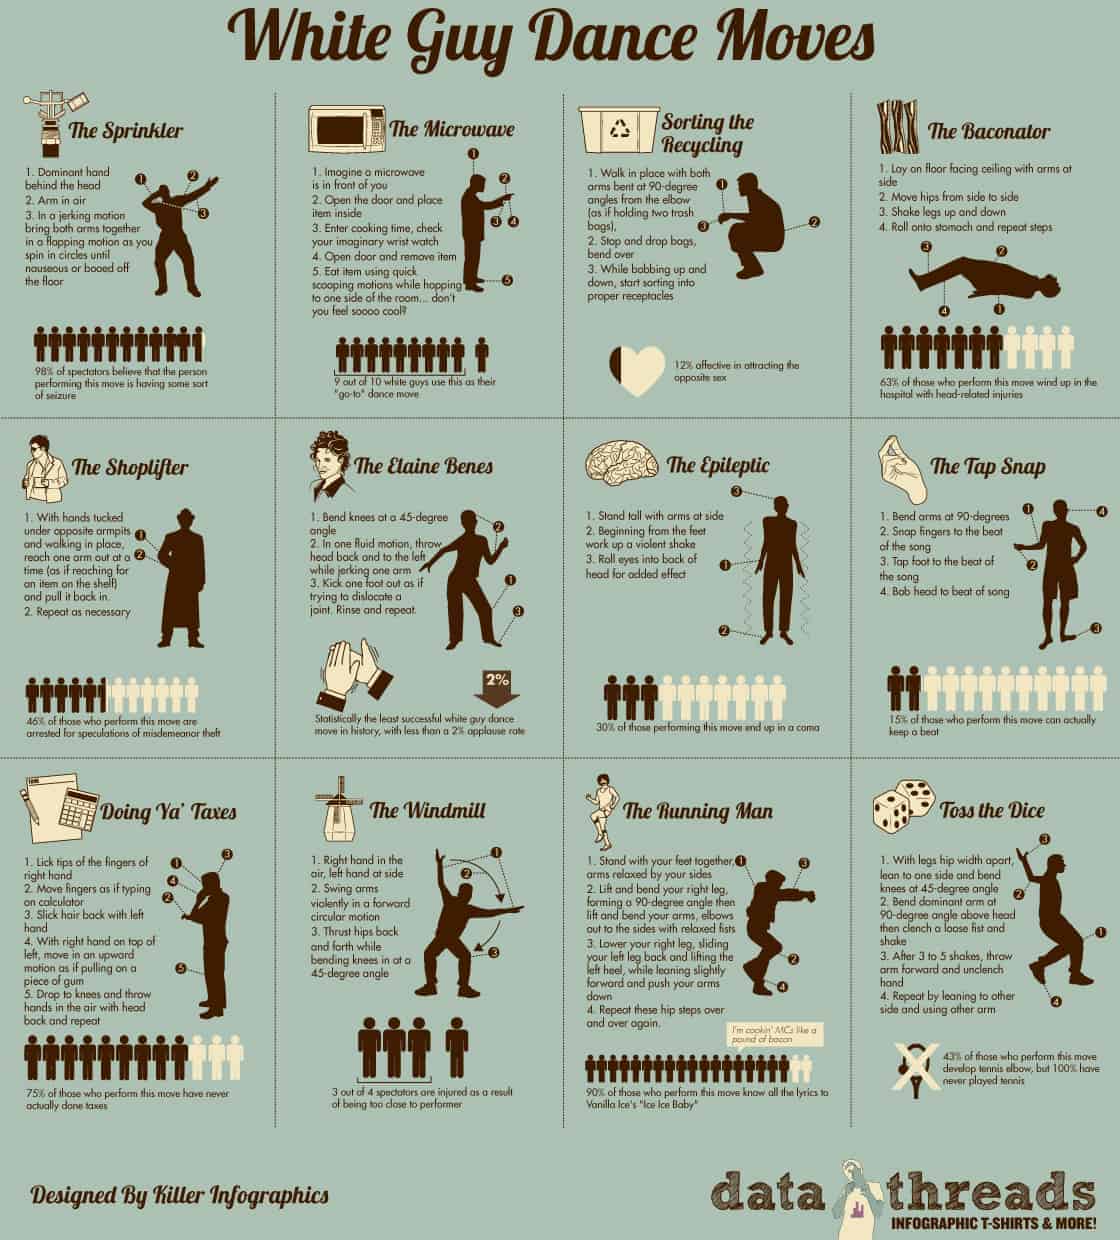 White Guy Dance Moves | Daily Infographic